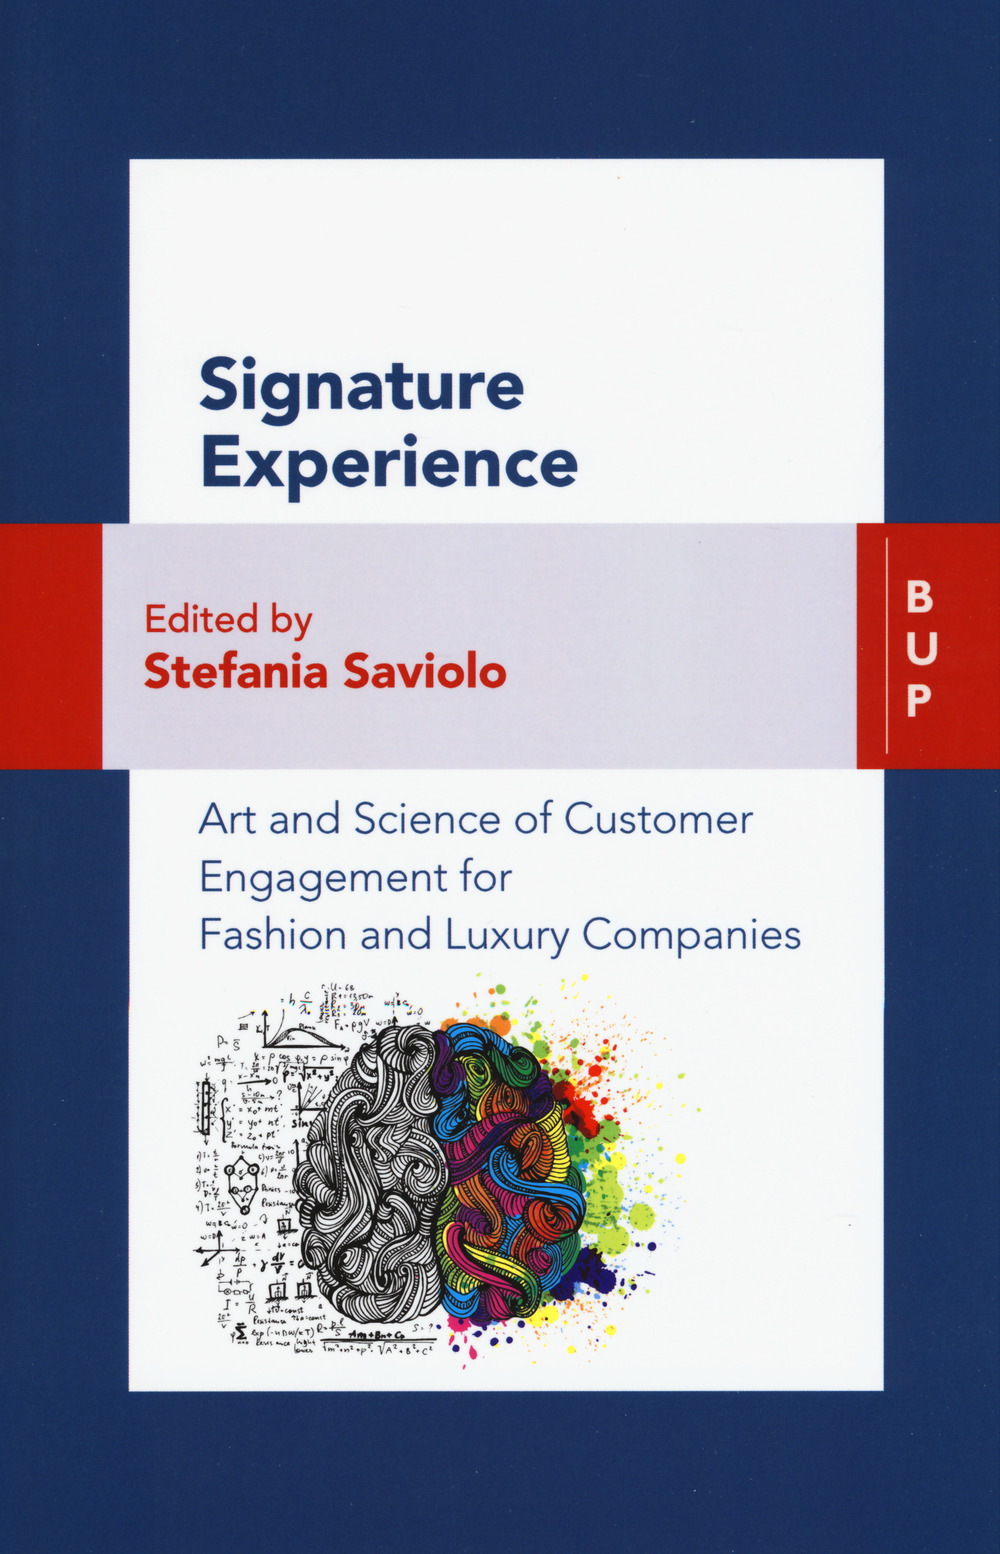 Signature experience. Art and science of customer engagement for fashion and luxury companies